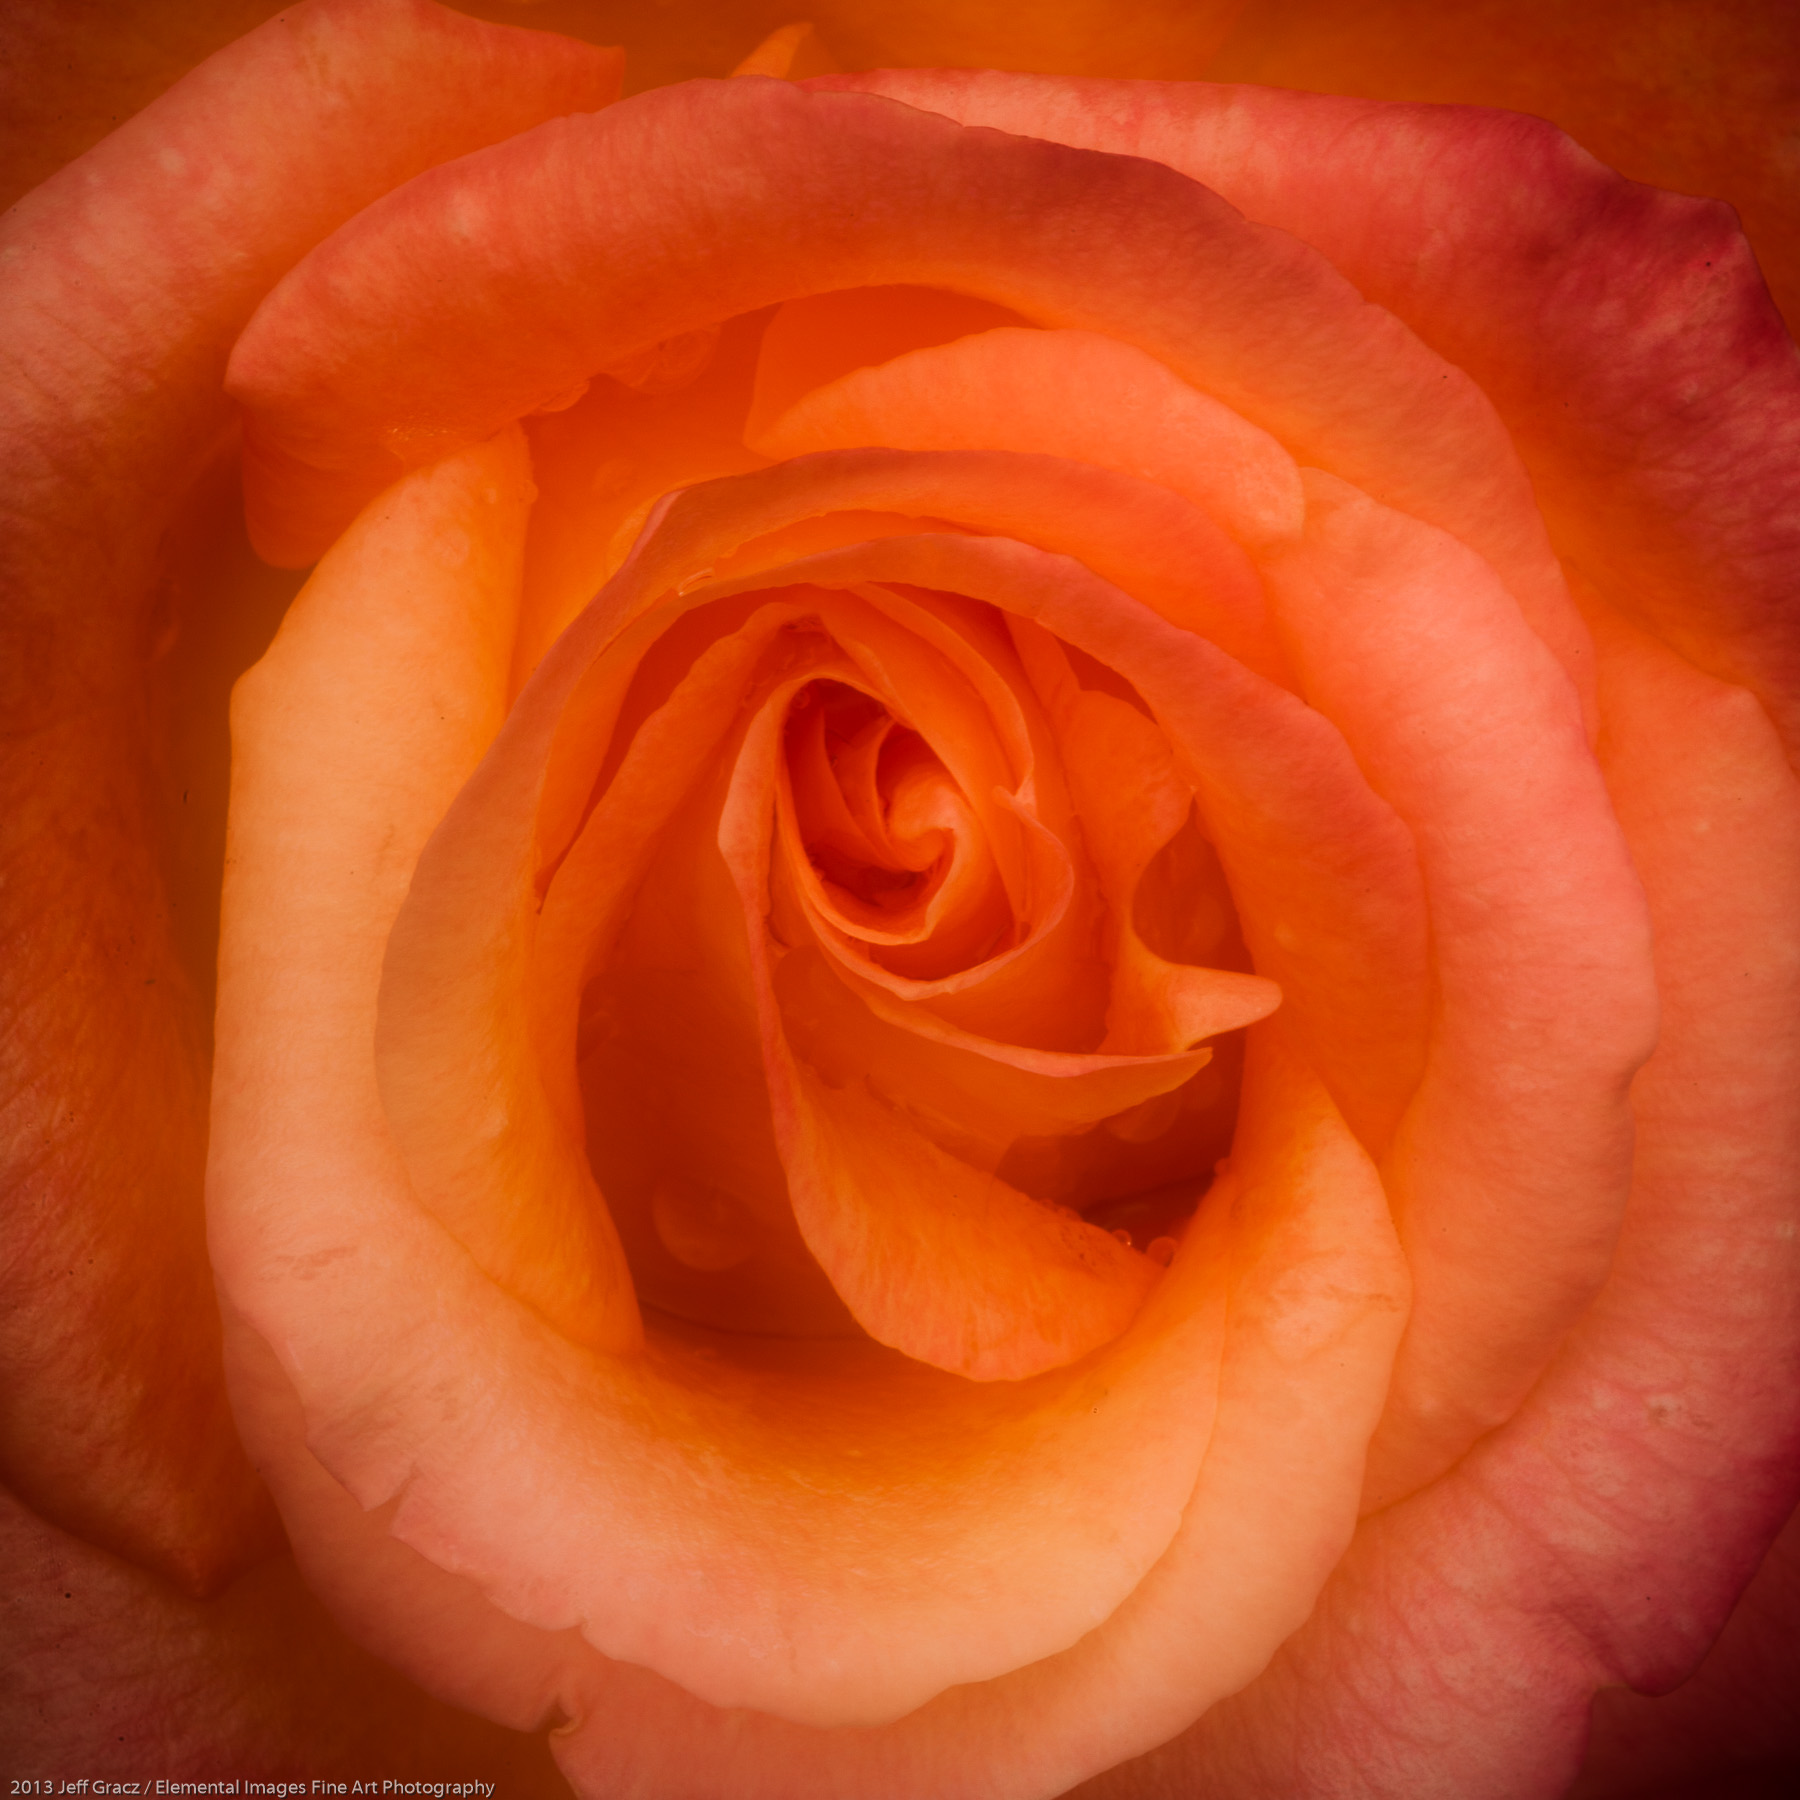 Roses LIII | Portland | OR | USA - © 2013 Jeff Gracz / Elemental Images Fine Art Photography - All Rights Reserved Worldwide